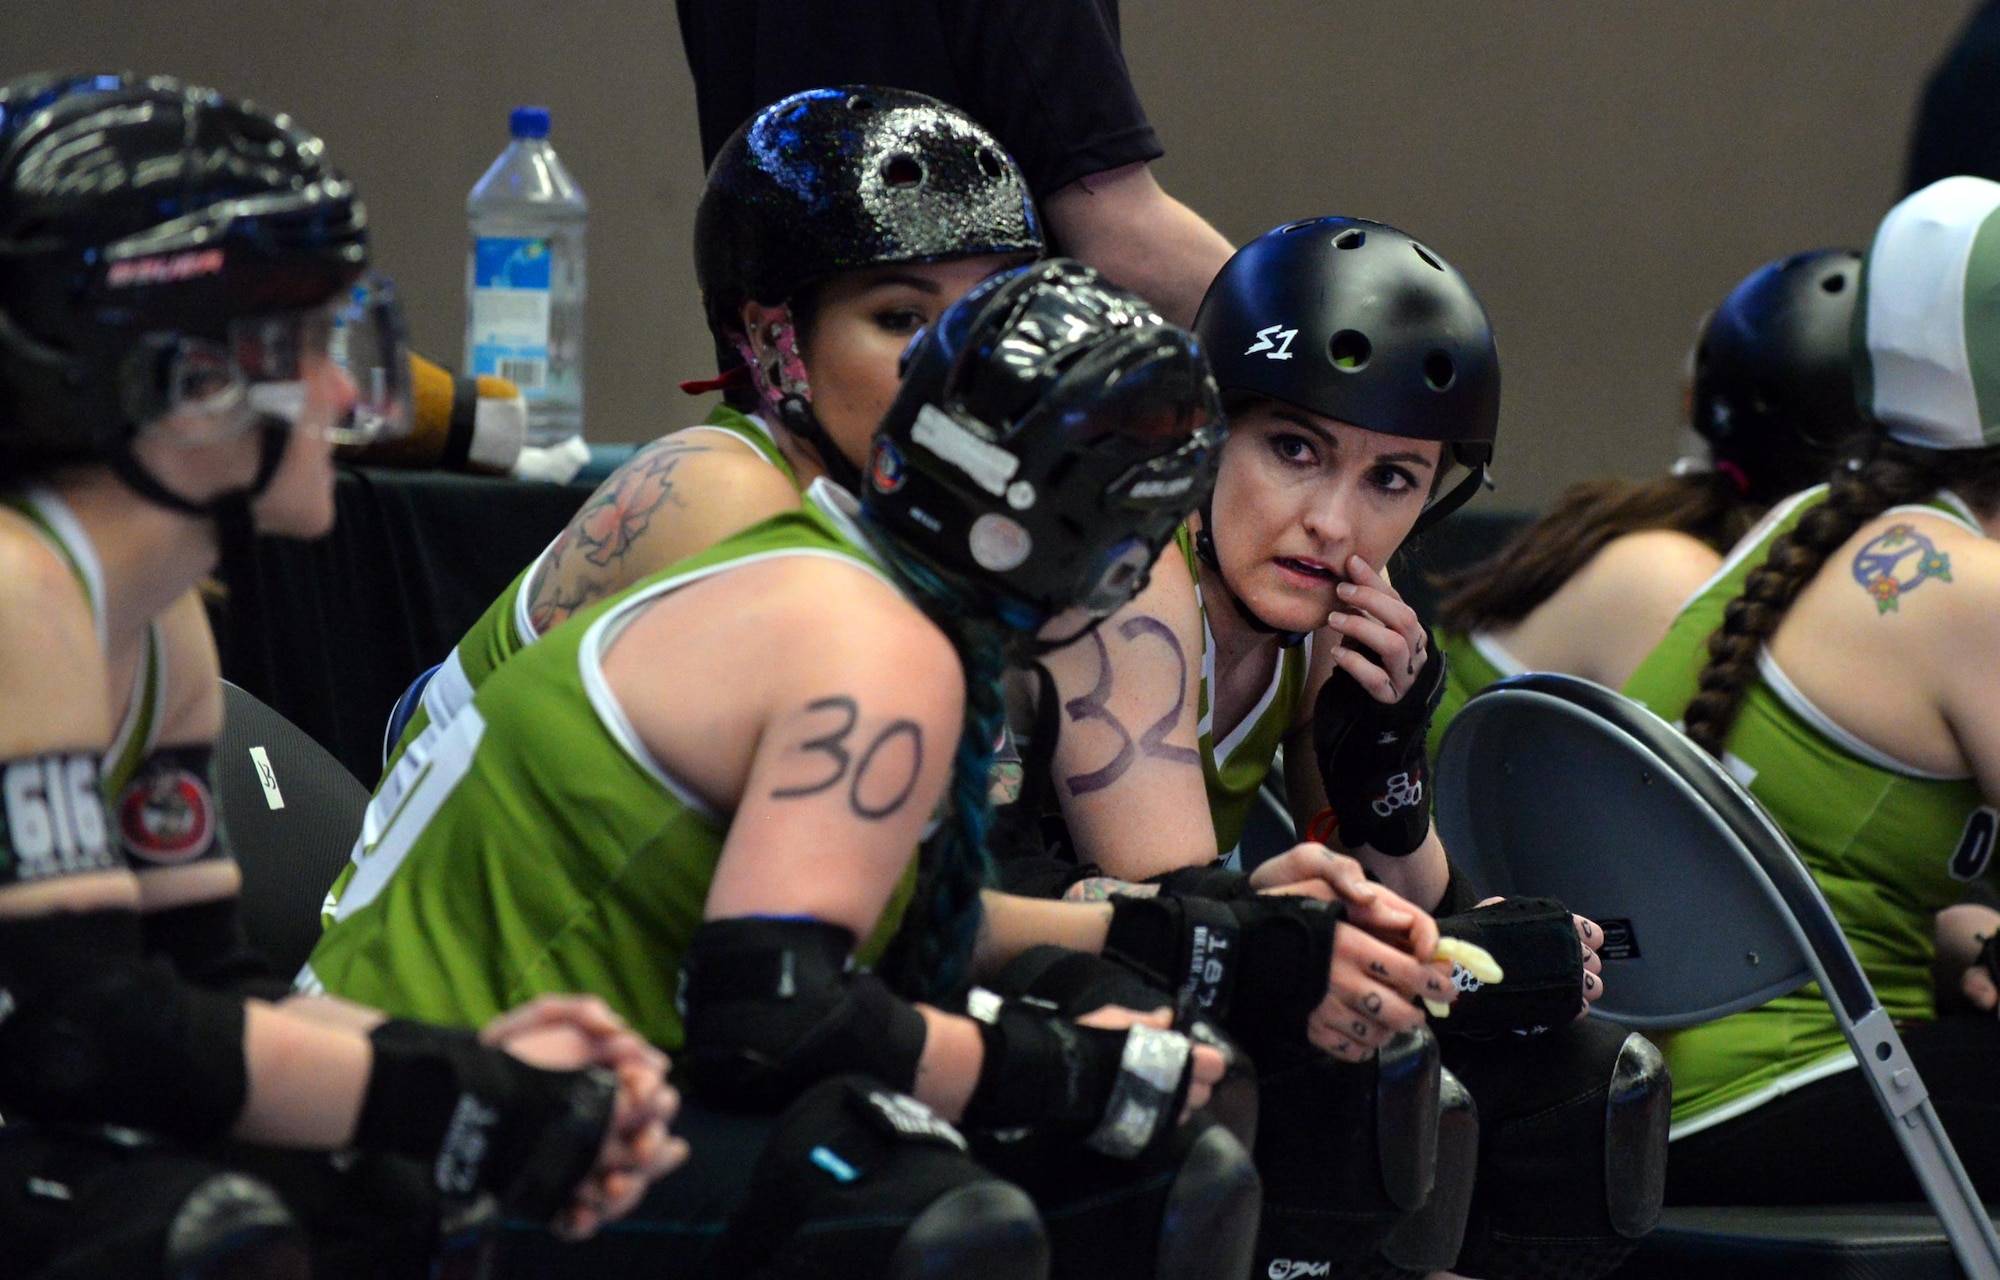 U.S. Air Force Maj. Jocelyn Smith, an executive officer with the 55th Wing Headquarters, takes a quick break from the roller derby game held at the Ralston Arena, Neb., March 26, 2016. Once she dons her skates, Smith becomes Amelia Airhurt of the Omaha Rollergirls derby team.  (U.S. Air Force photo by Josh Plueger/Released)